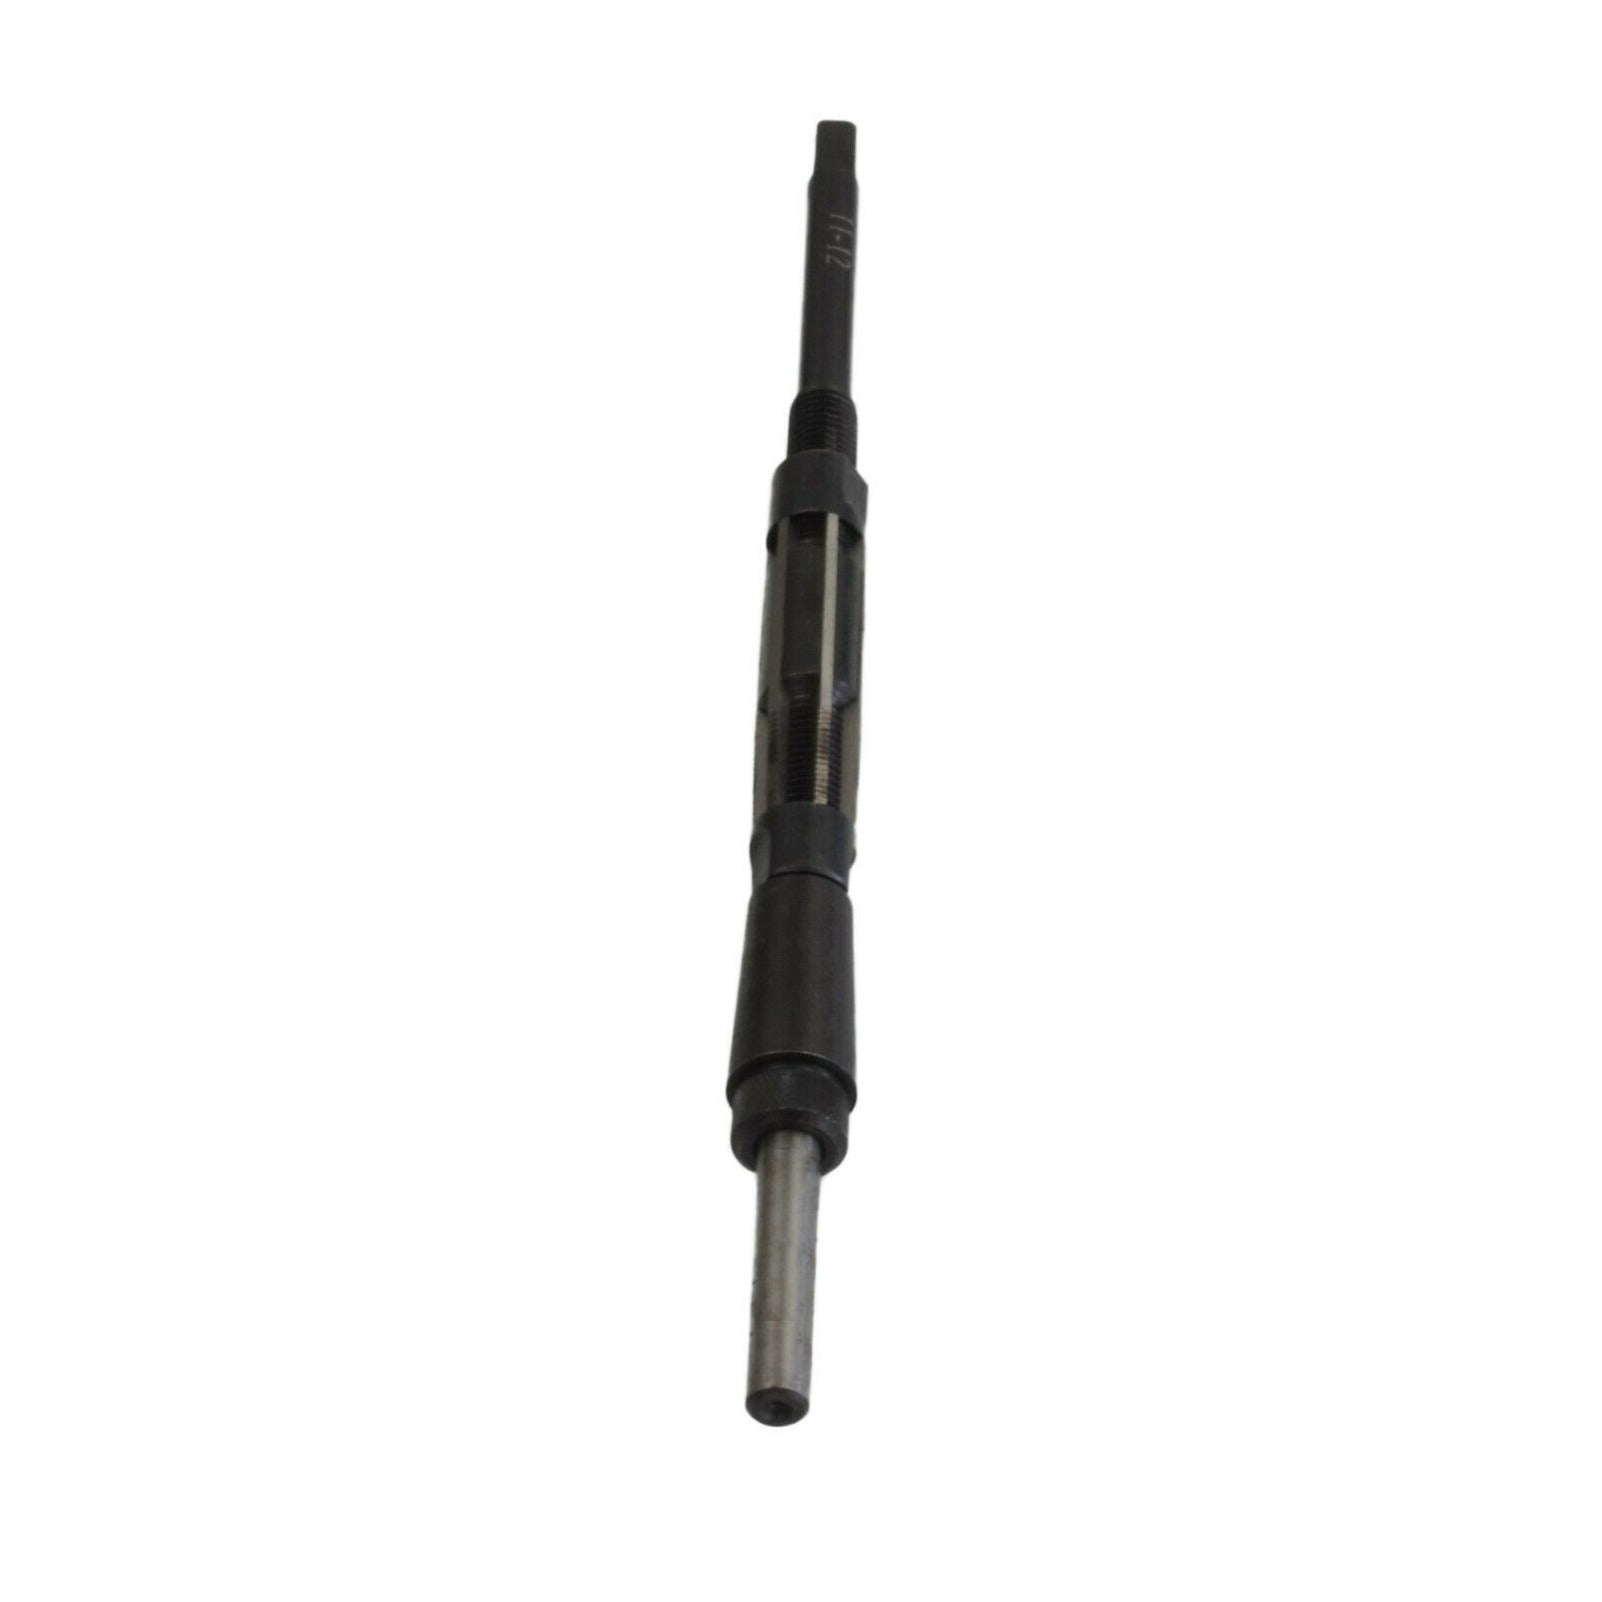 11-12 mm Adjustable Hand Reamer with Guide